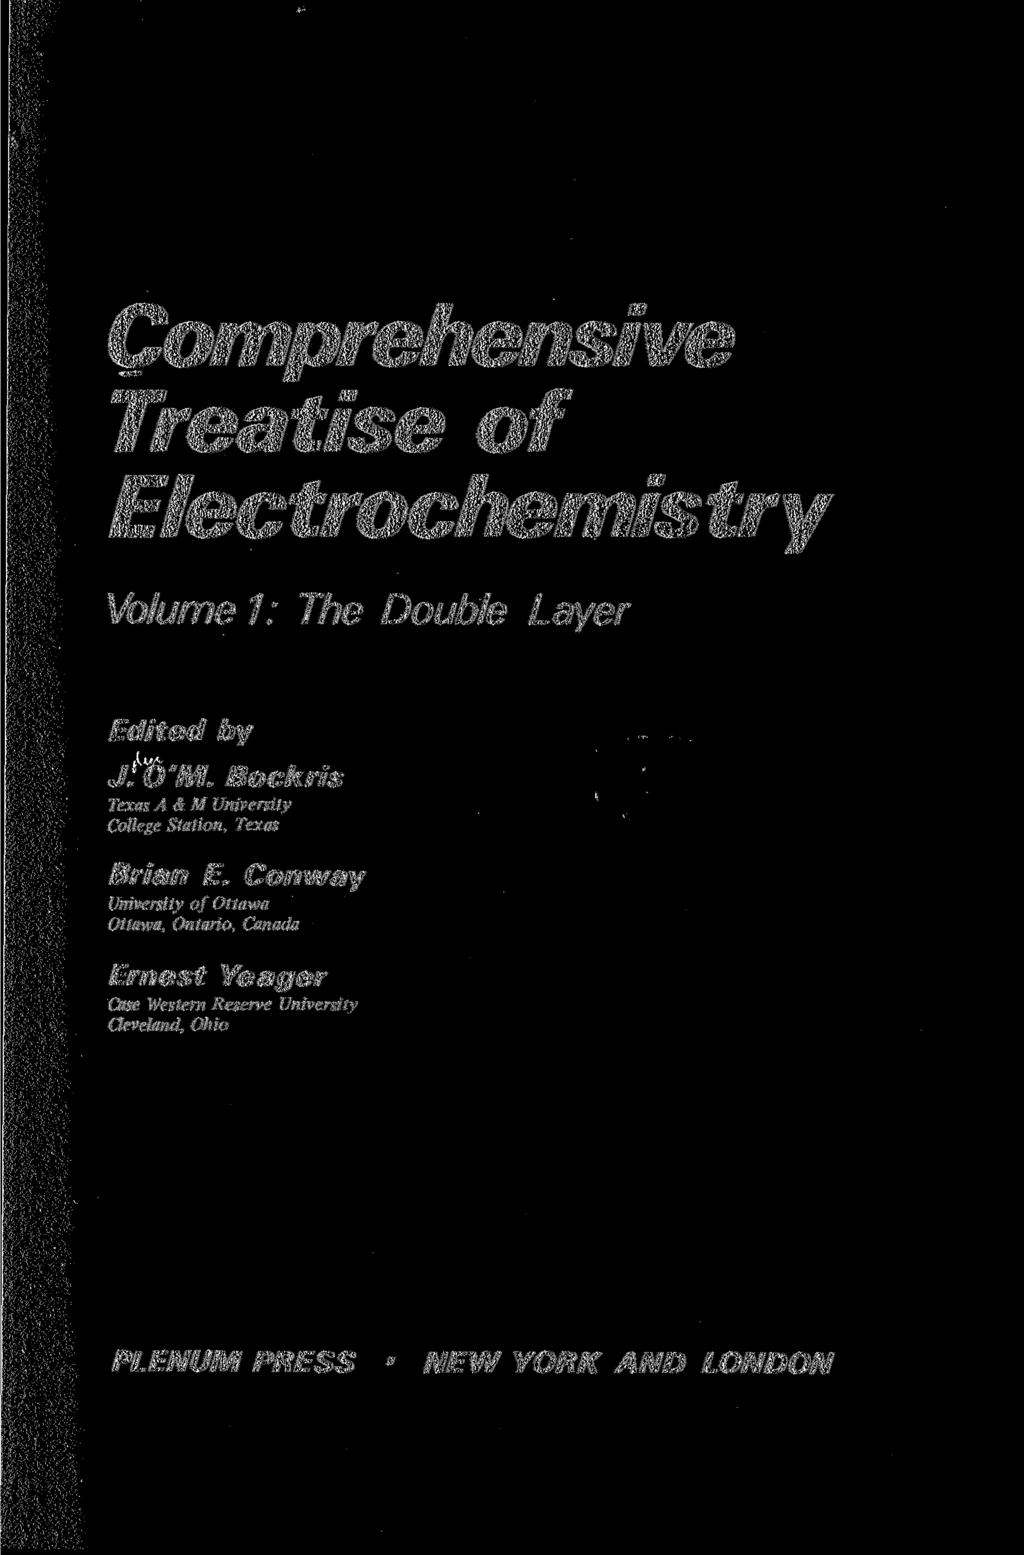 Comprehensive Treatise of Electrochemistry Volume 1: The Double Layer Edited by J. O'M. Bockris Texas A&M University College Station, Texas Brian E.